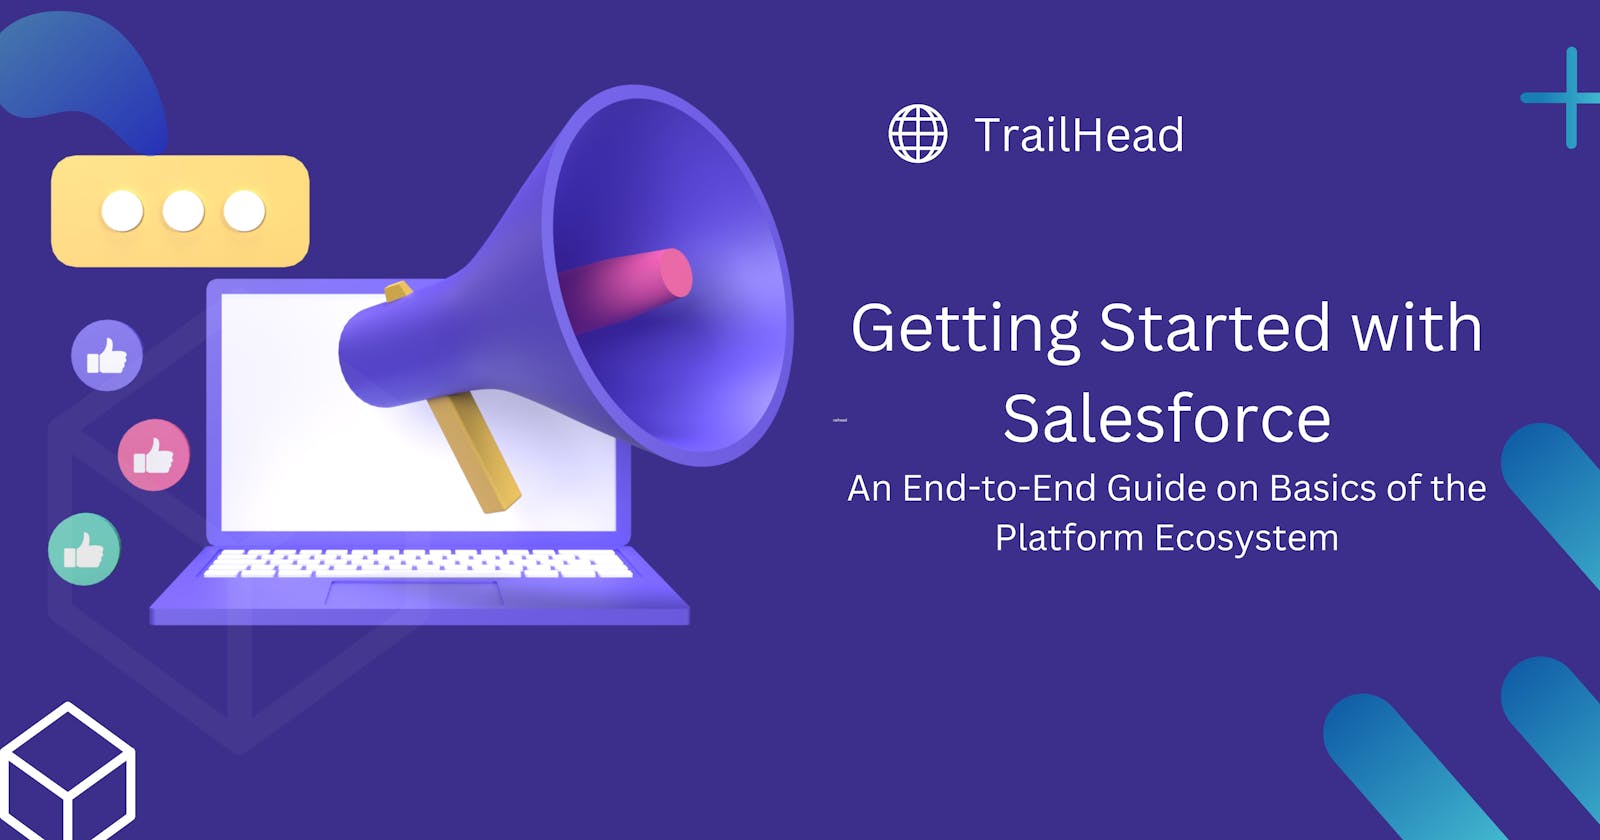 Accelerate Your Salesforce Trailhead Journey with Expert Guidance